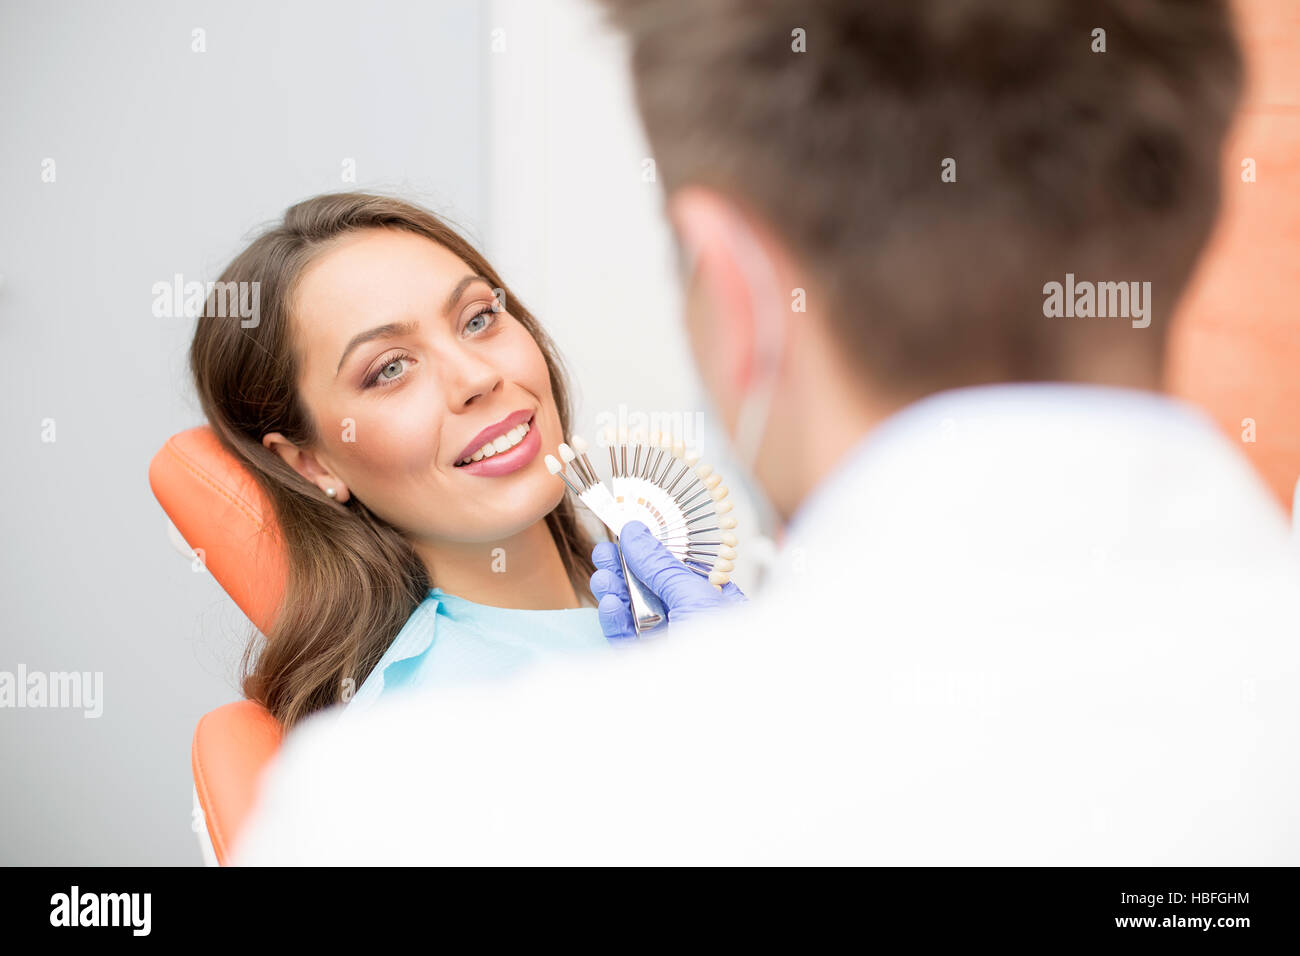 Set of implants with various shades of tone Stock Photo